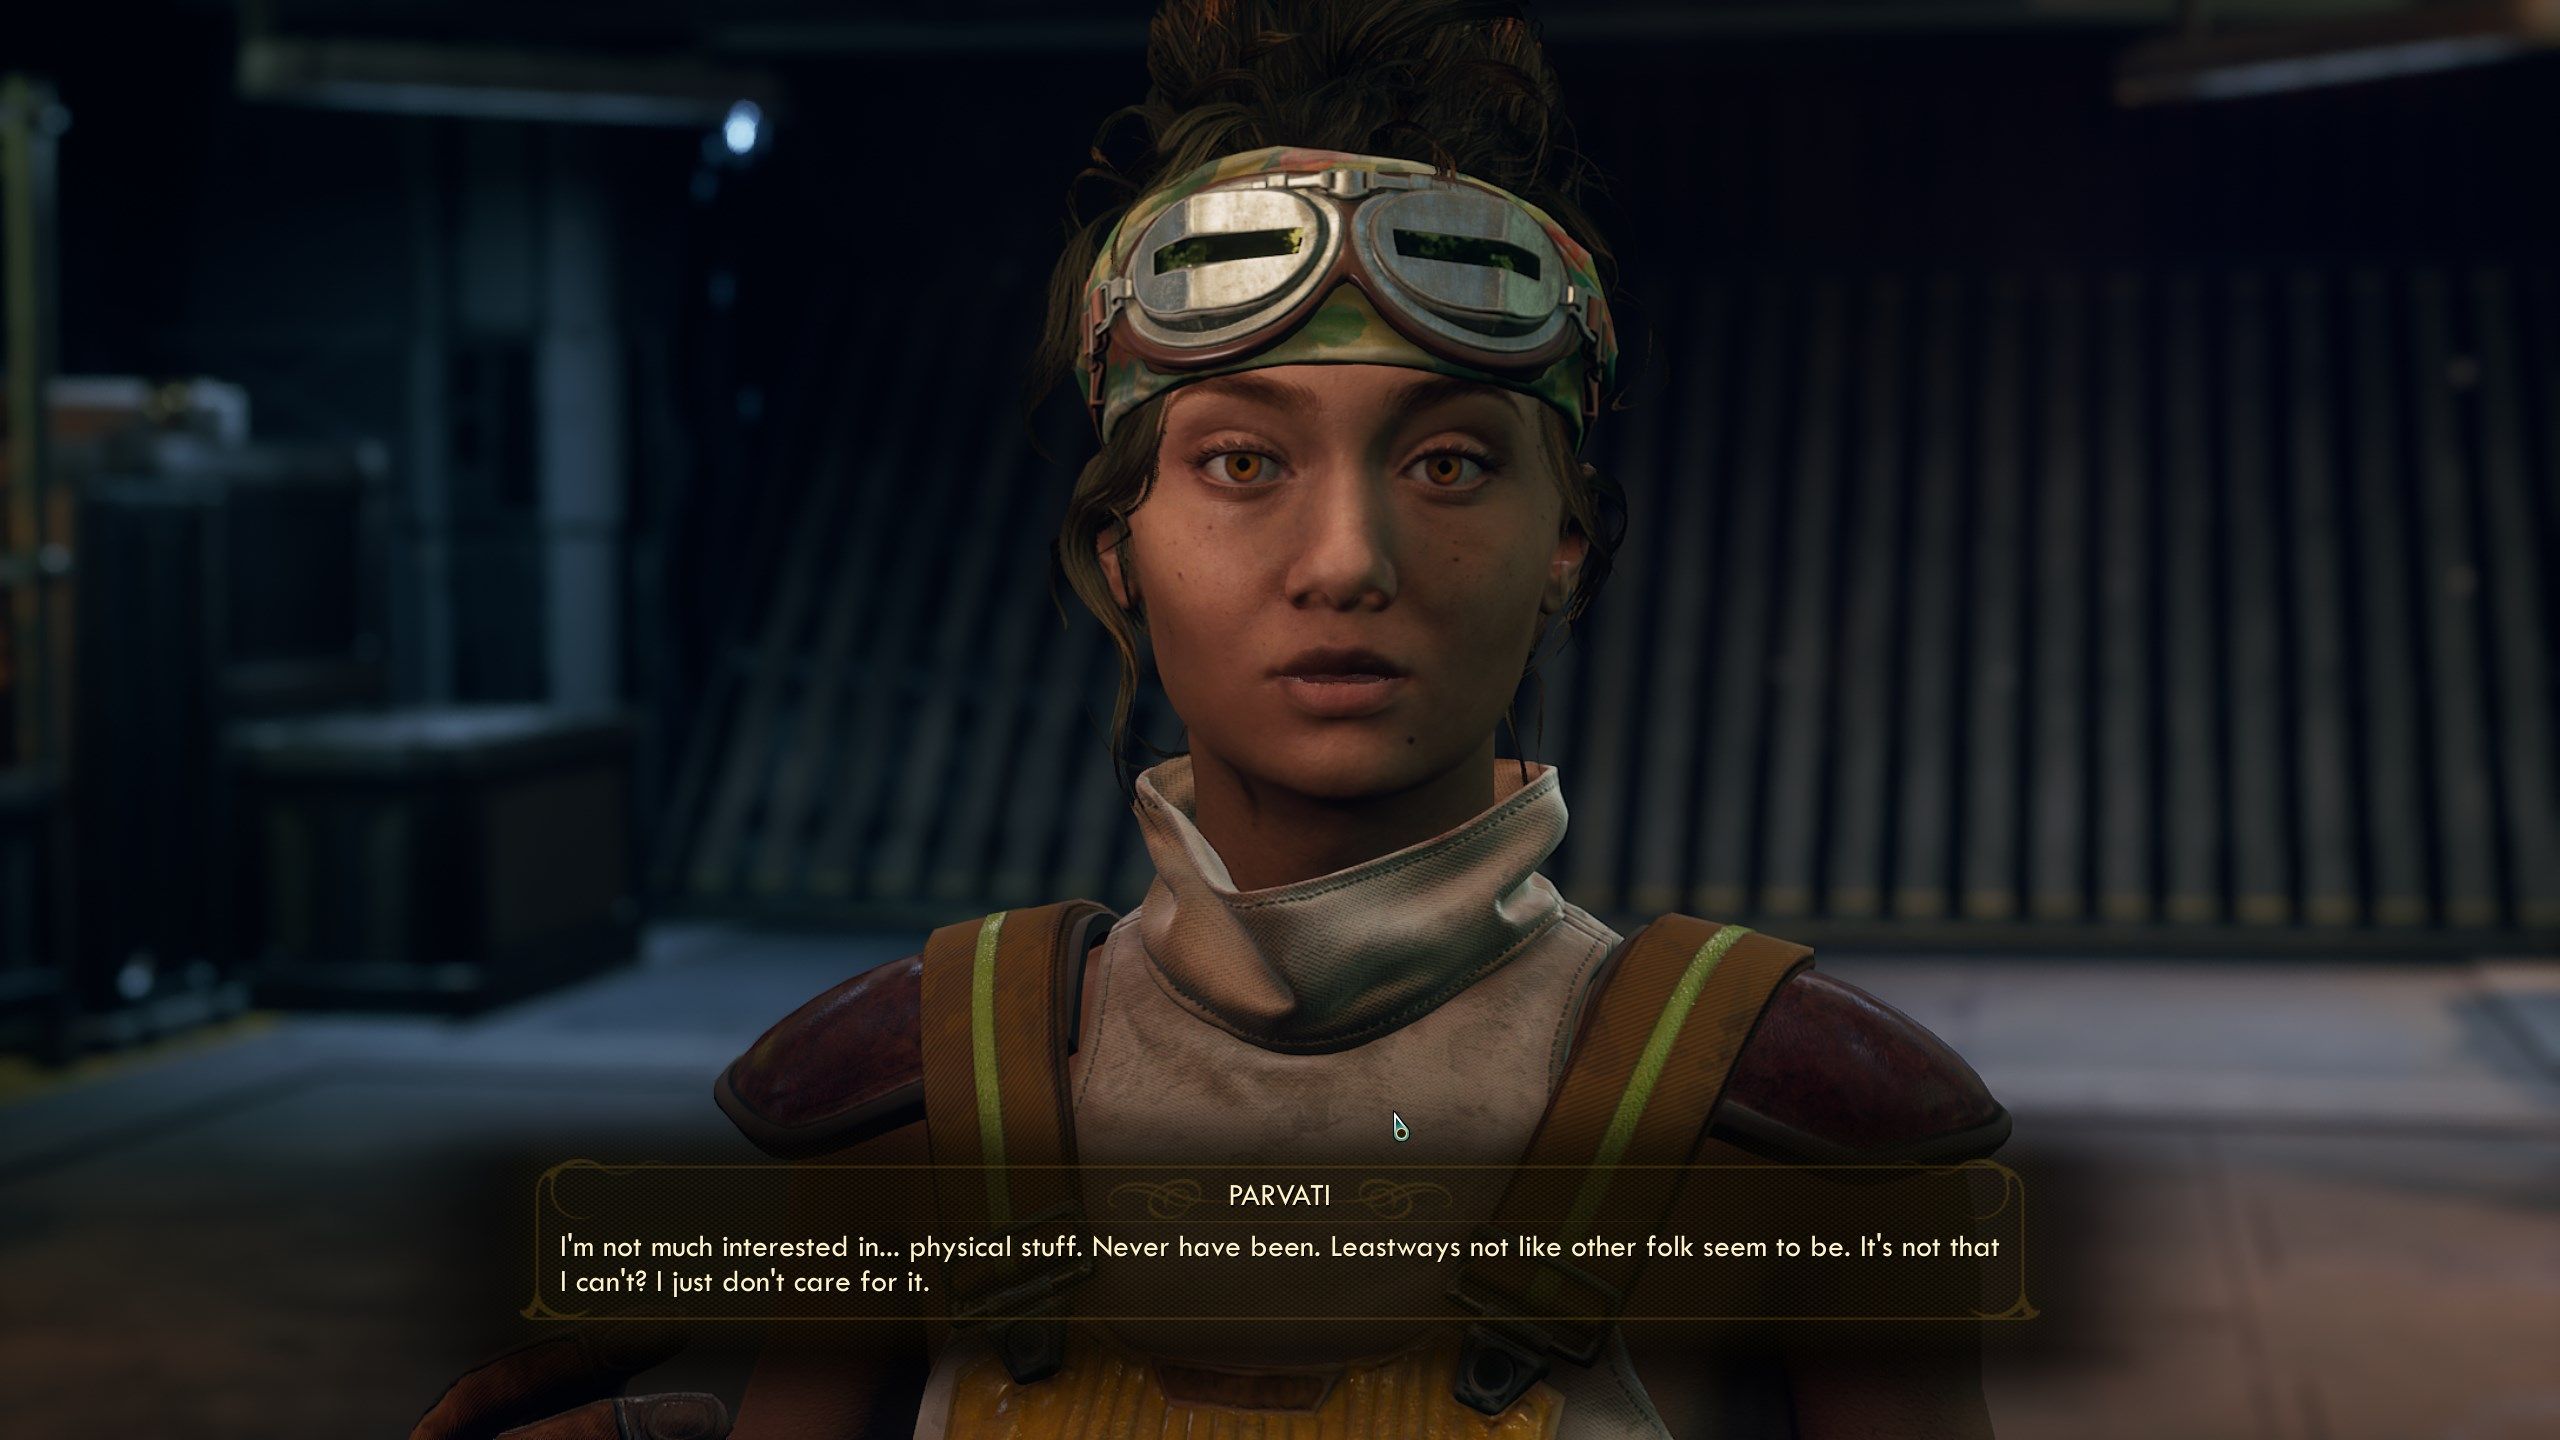 The Outer Worlds Doesn’t Need Romance Options